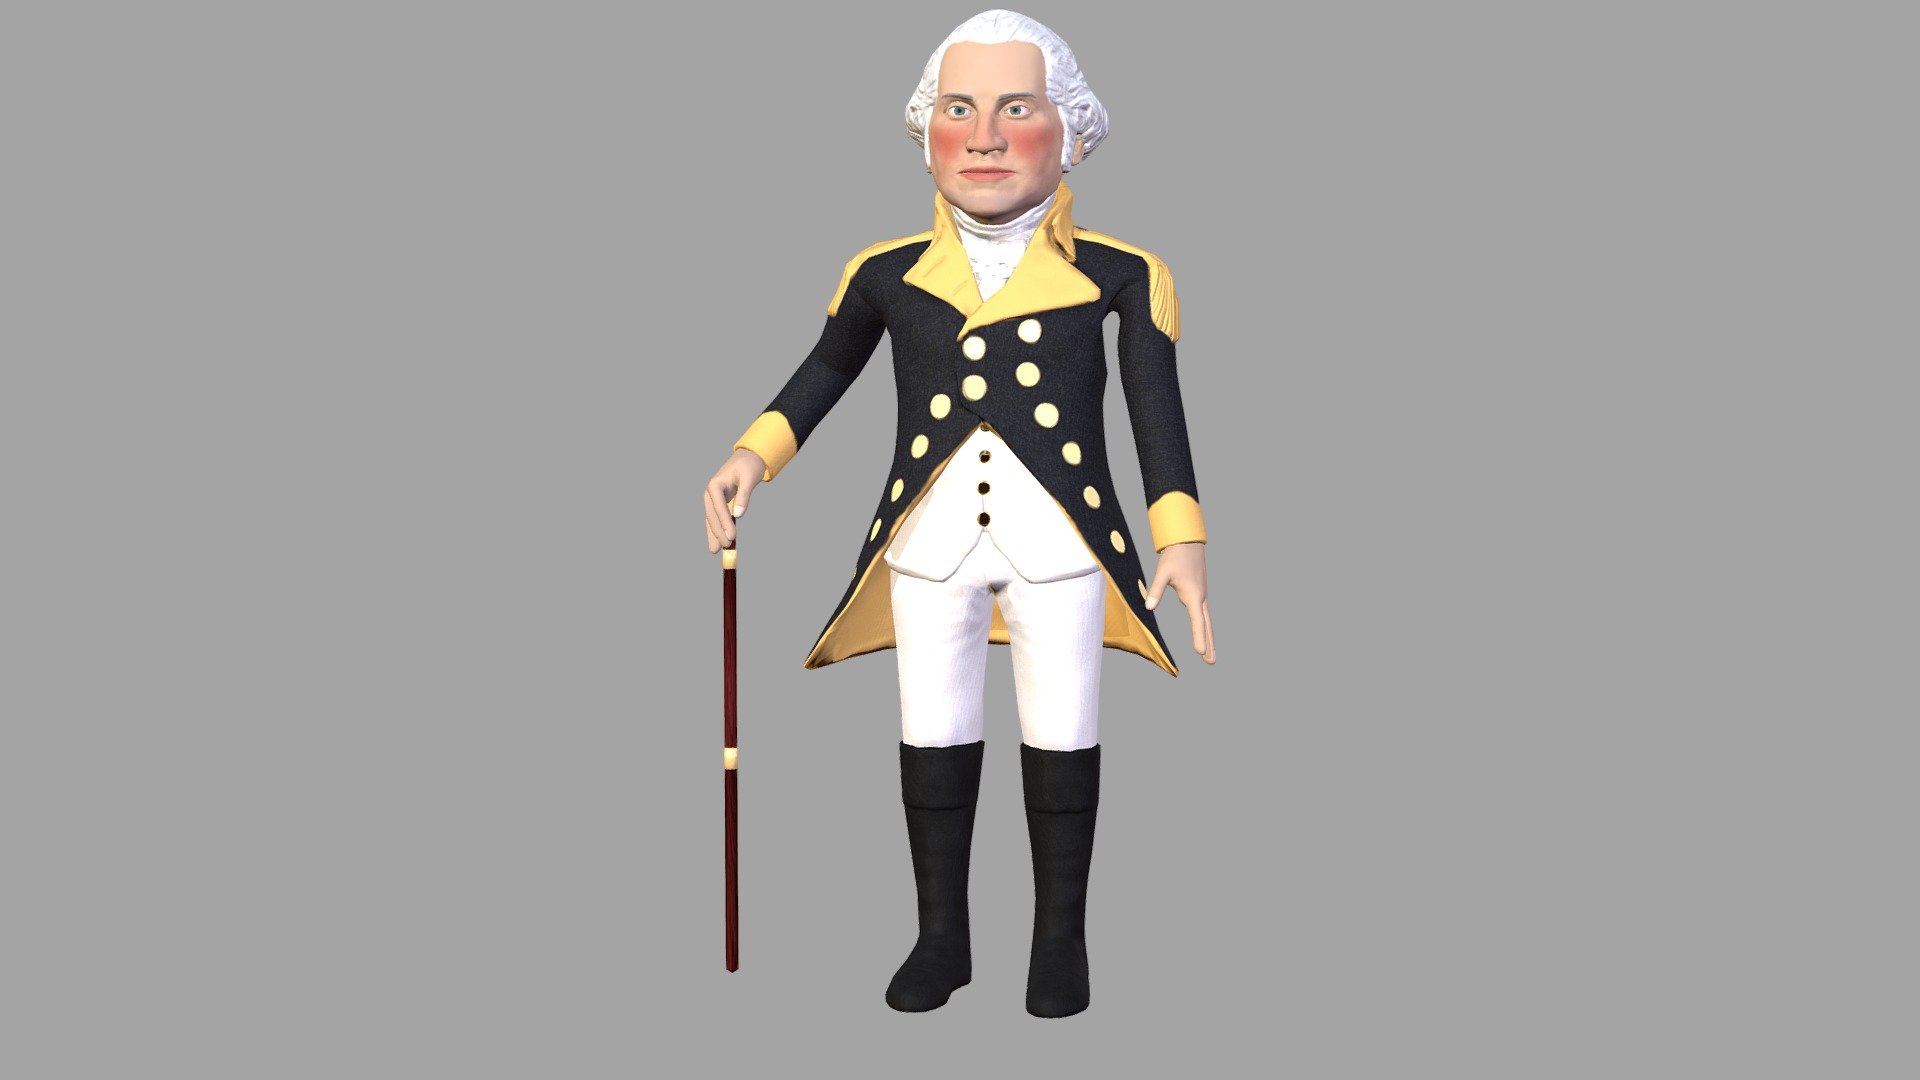 Low poly stylized 3D caricature of George Washington, first president of United States.
Game ready, rigged, animated 3D character. 
T-posed rigged FBX file and Maya file is included among extra files folder. In that folder 2 more texture variants are included. Rig on T-posed file is complatible with Unity Humanoid system.  

Browse my store to see more of my work. 

Message me if interested to commision me for custom work 3d model